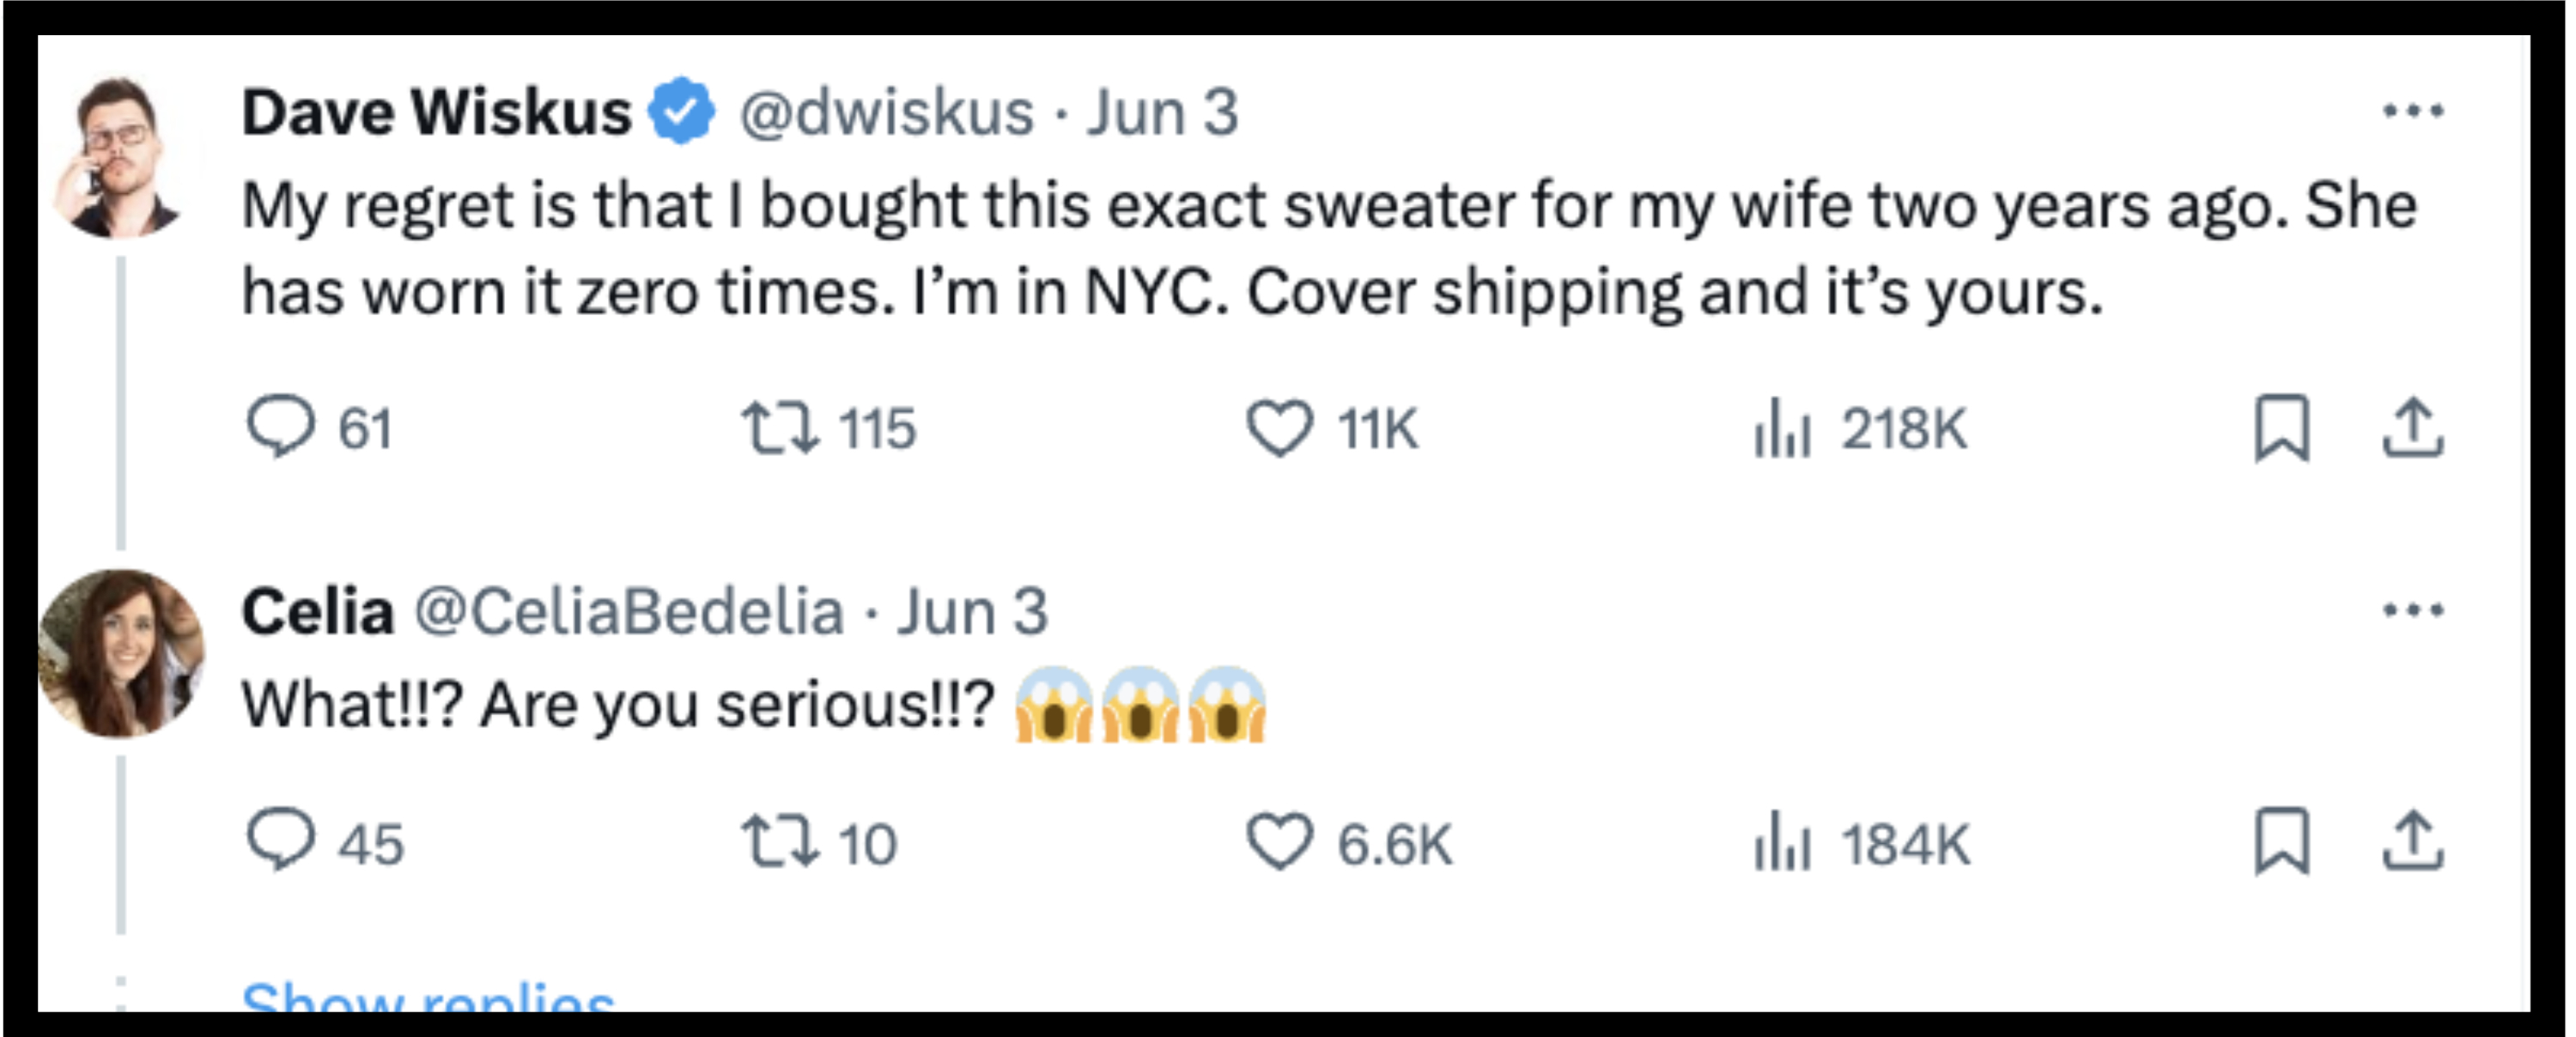 Dave Wiskus tweets he regrets buying a sweater his wife never wore, offering it for free. Celia replies in shock, asking if he&#x27;s serious